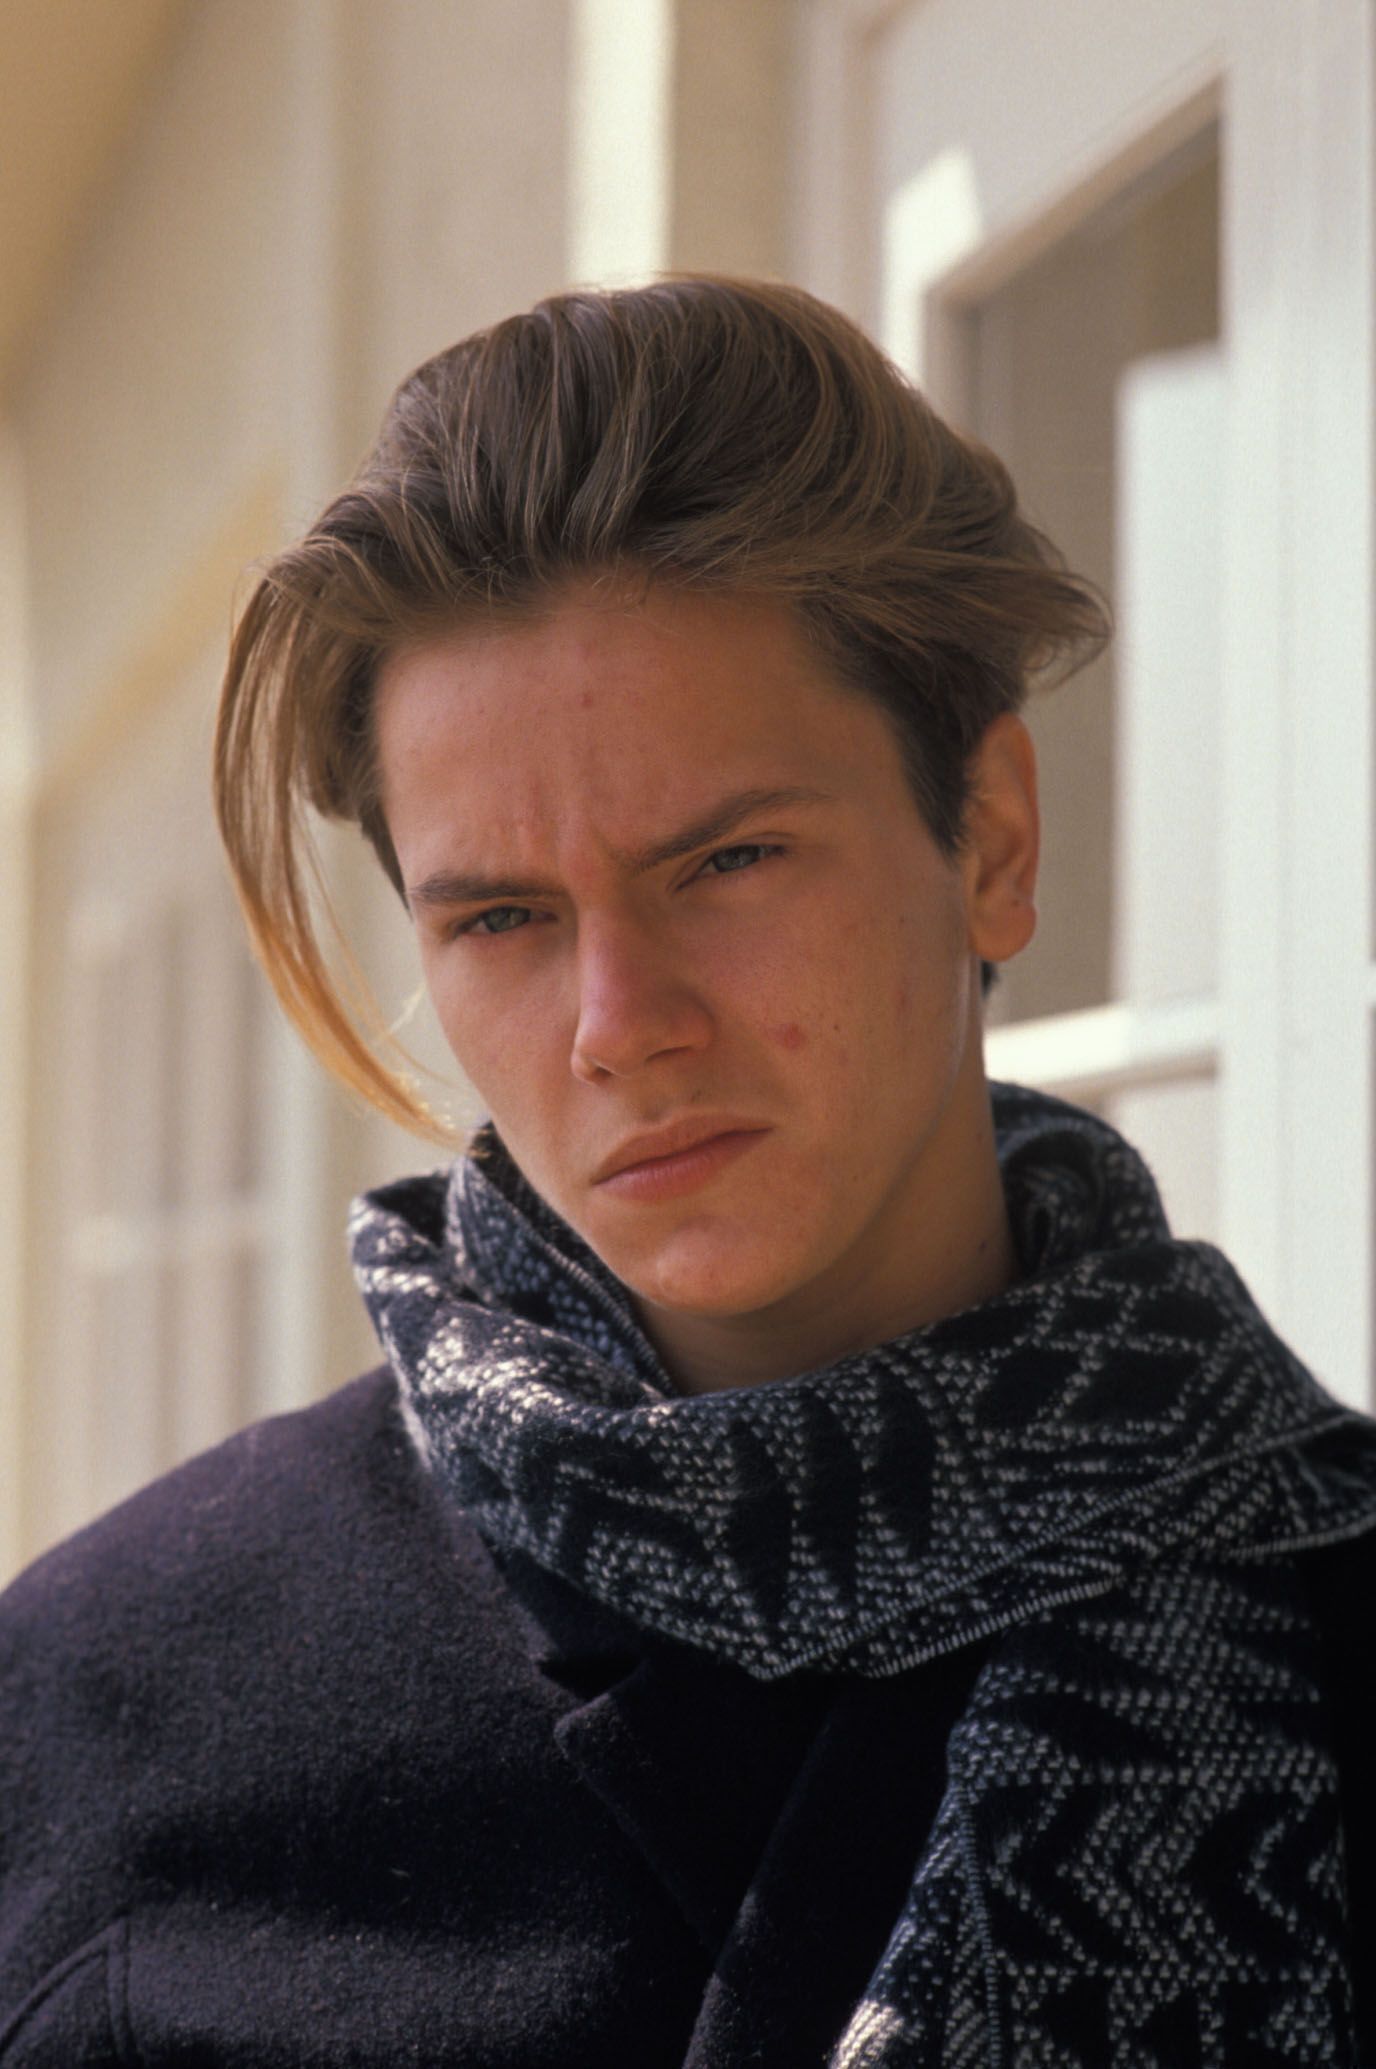 River Phoenix Best Photo Of All Time